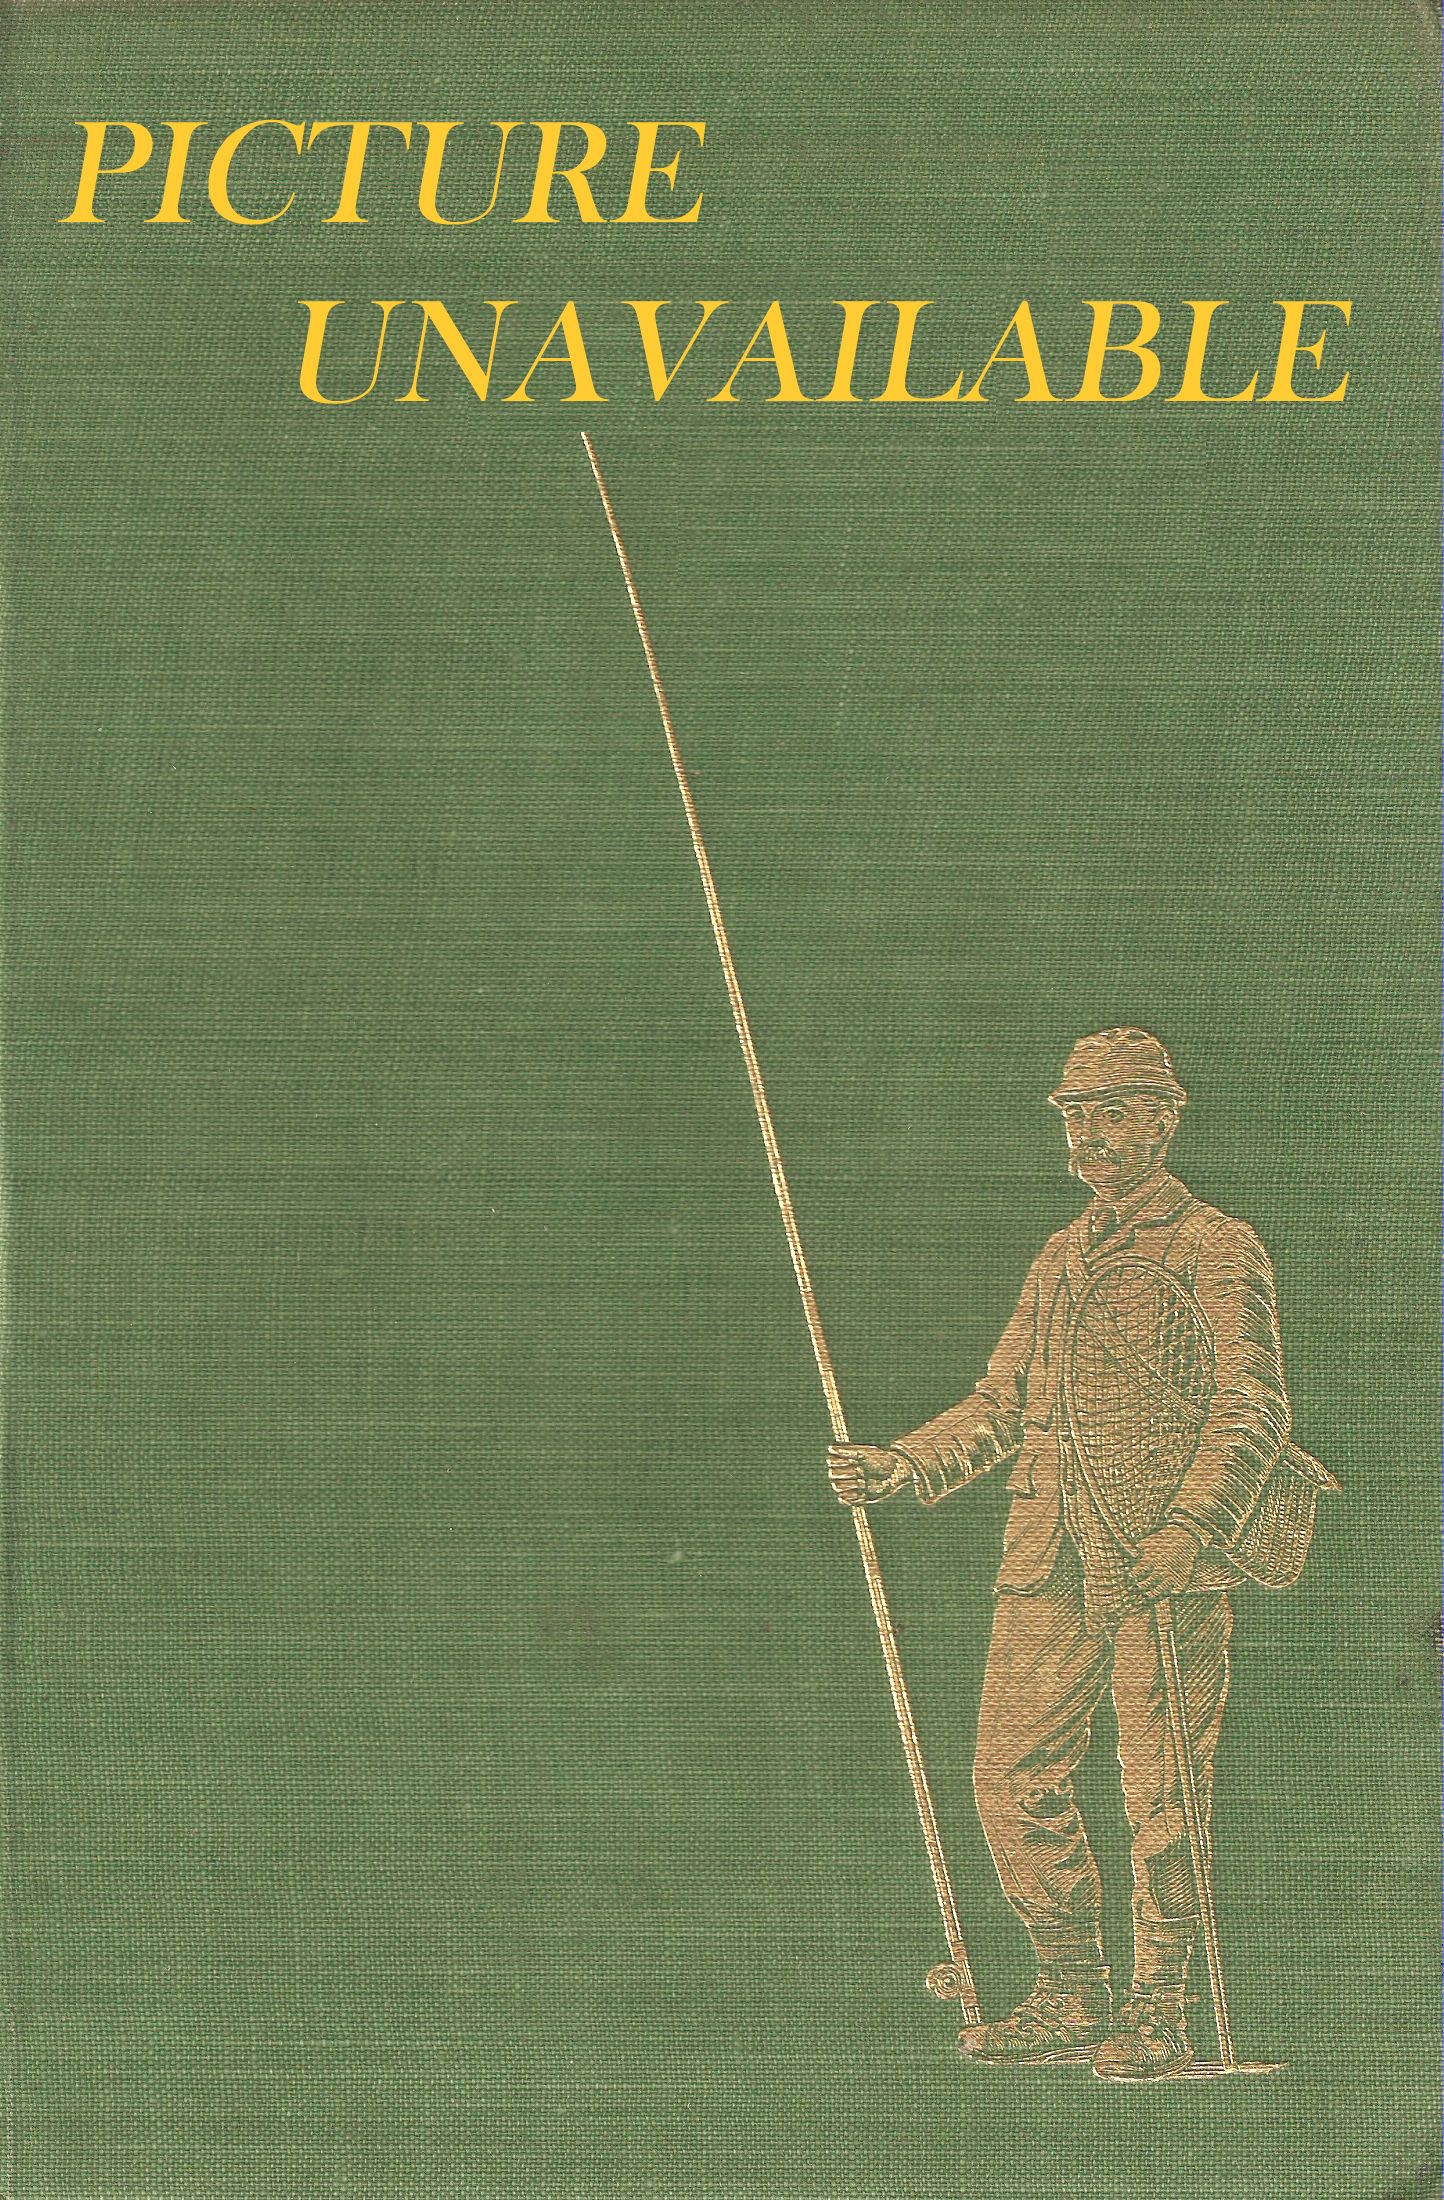 THE SIXTH EDITION OF THE JOLLY ANGLER; OR WATERSIDE COMPANION. Containing  an account of all the best places for angling, as well as the tackle,  baits, and other requisites to form an expert angler... By J. March.